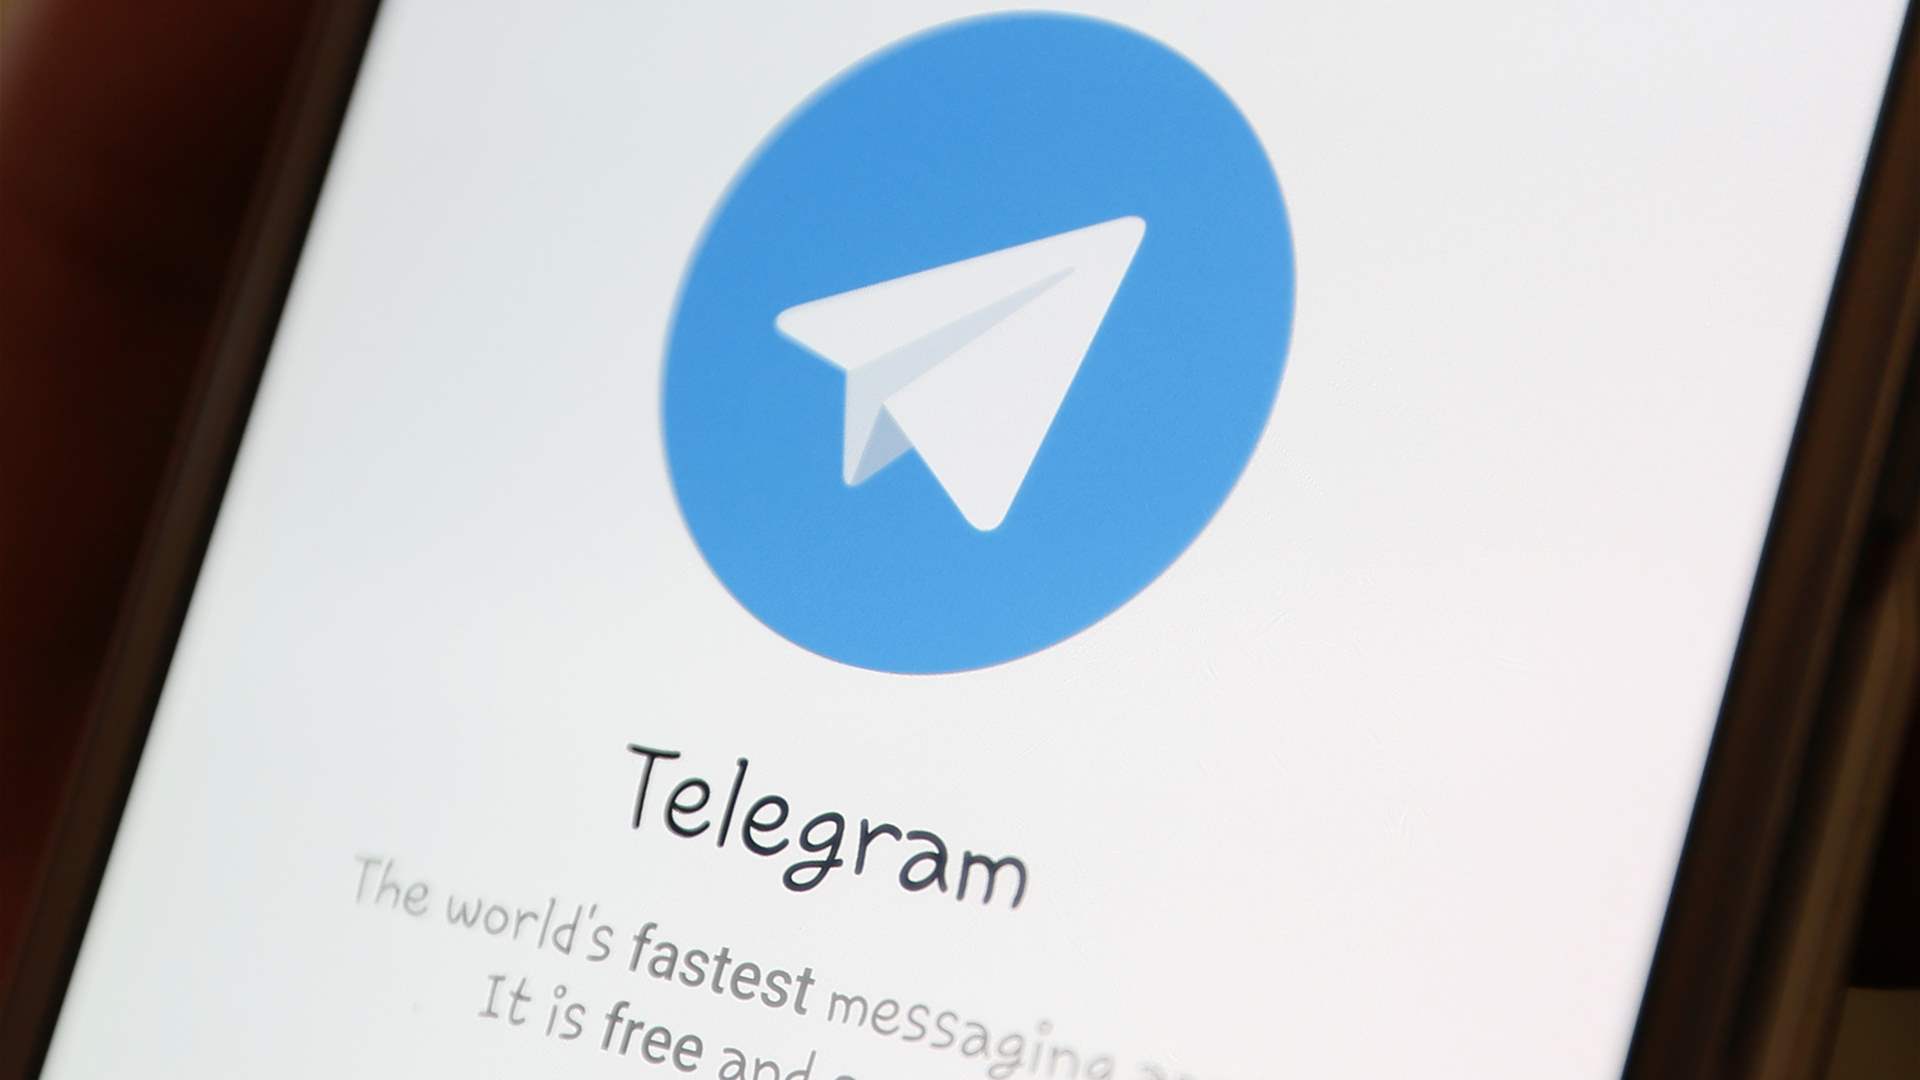 Telegram: A preferred way of communication for the war between Israel and Hamas